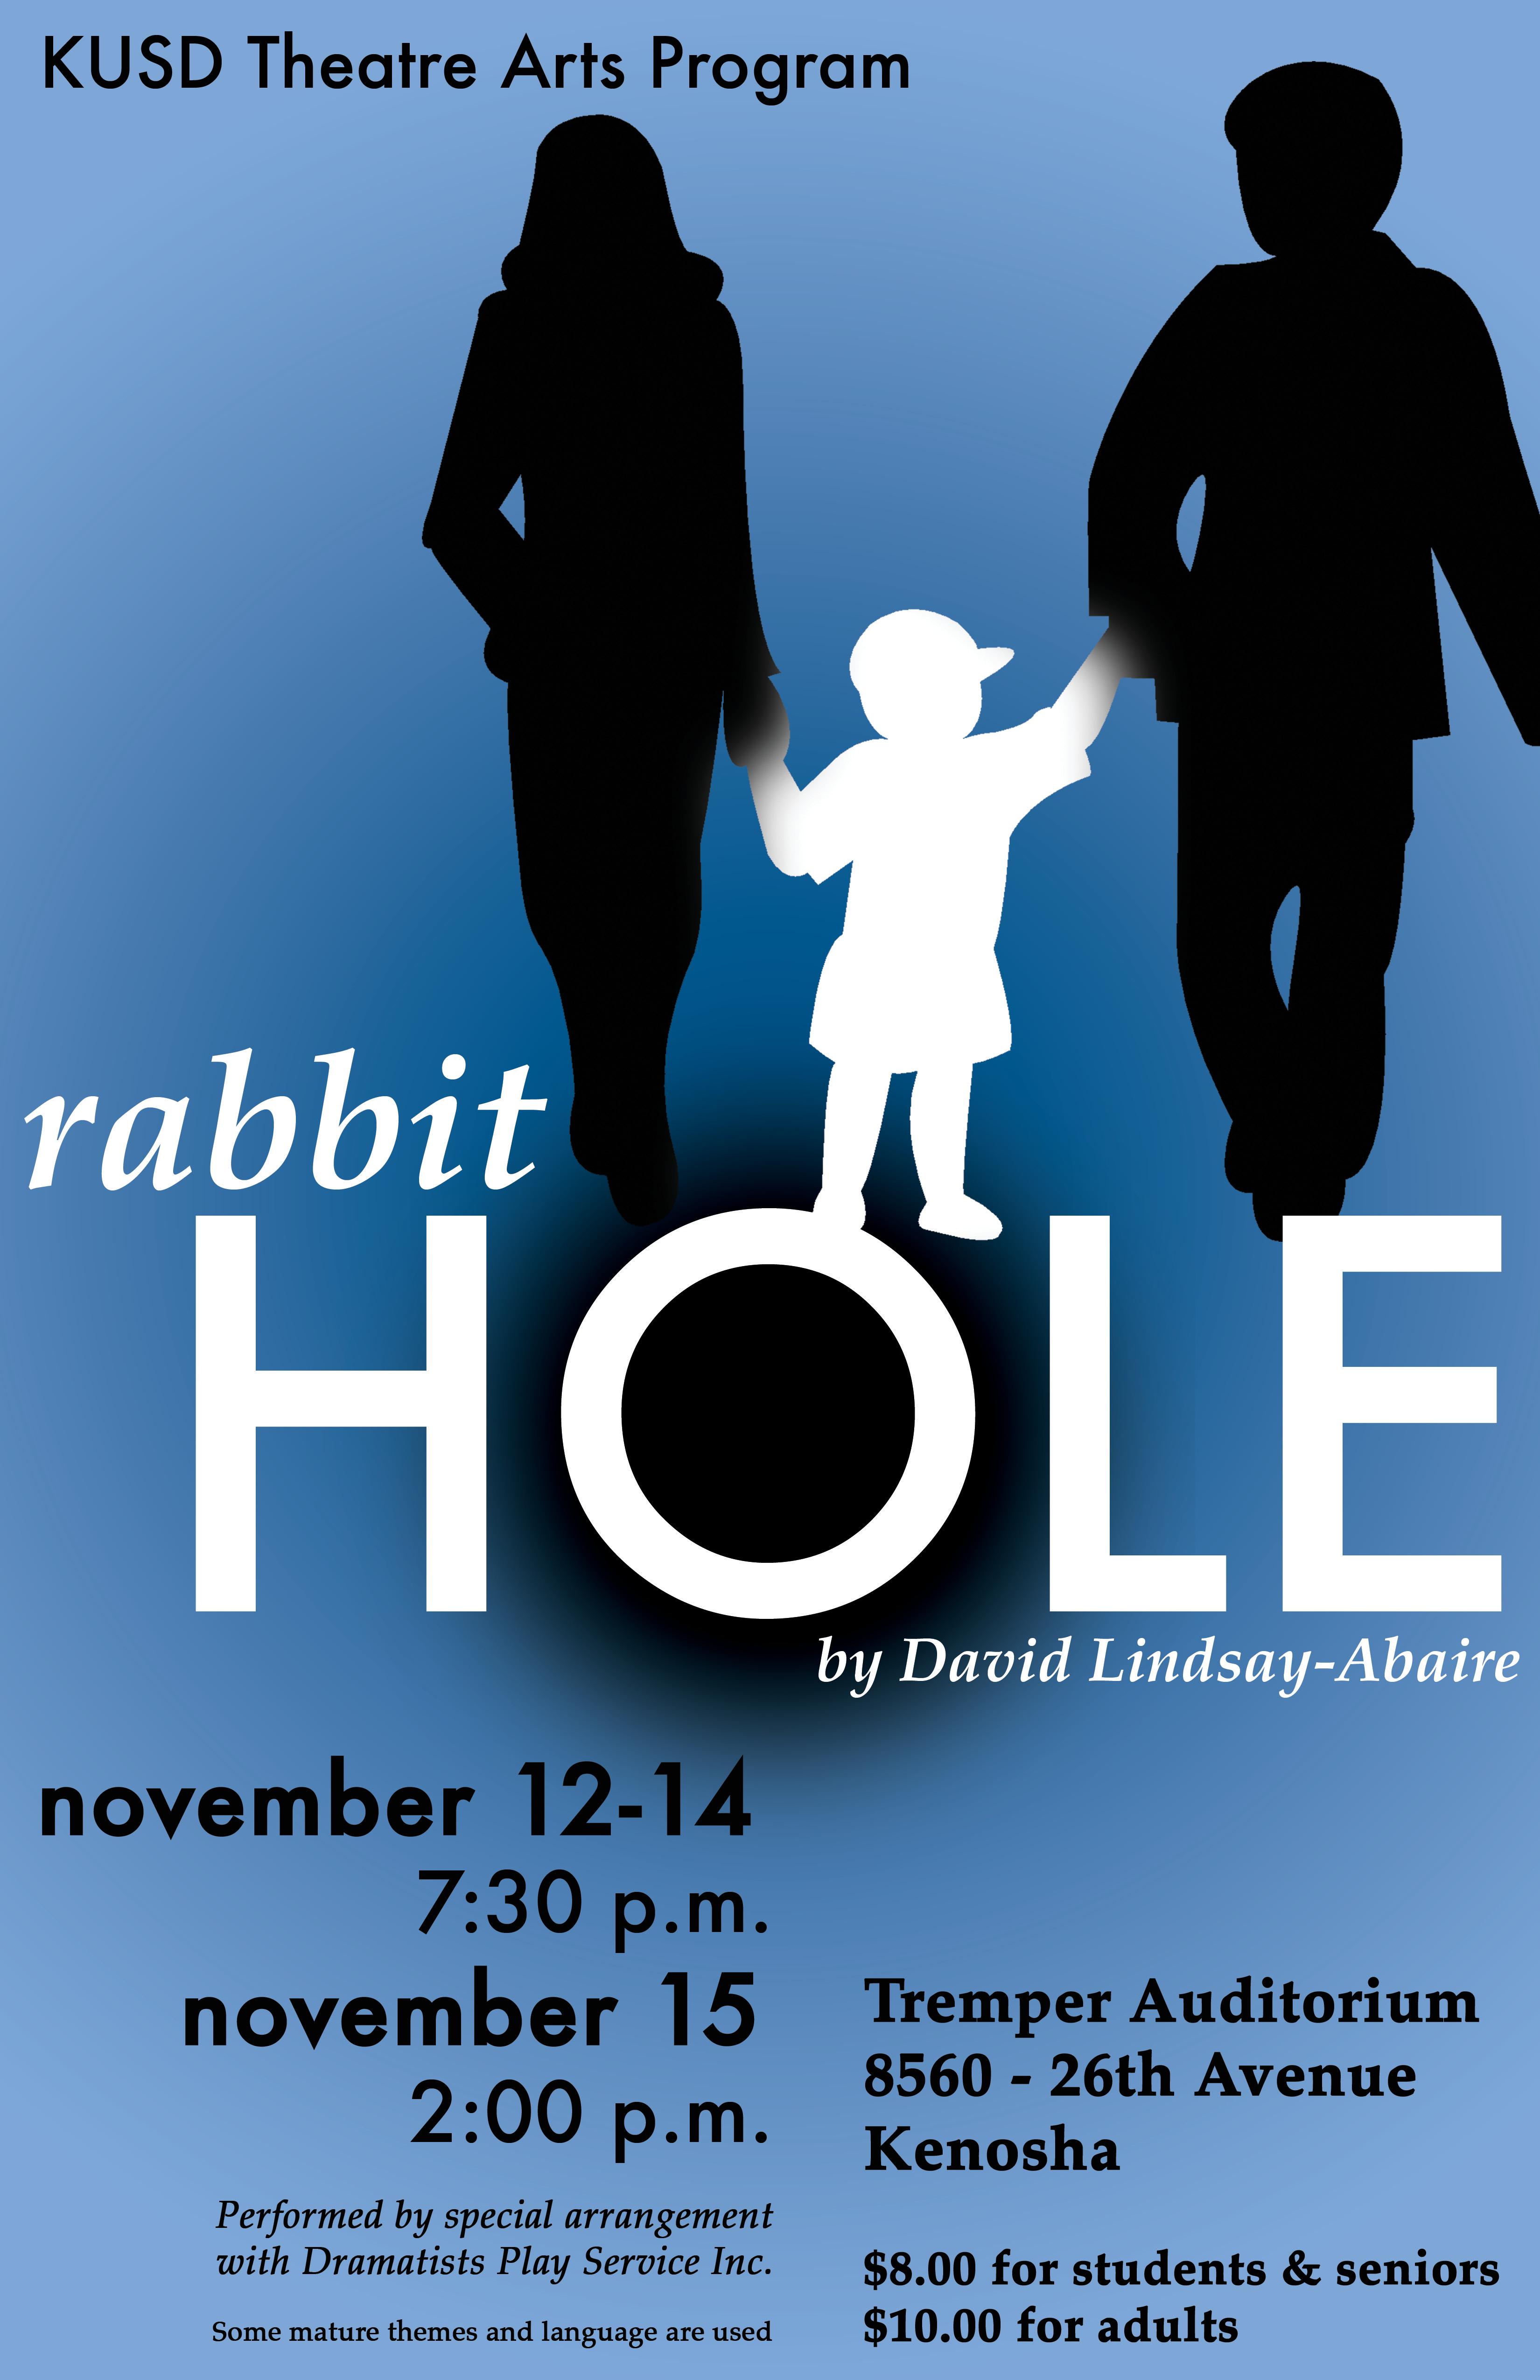 The poster for Rabbit Hole